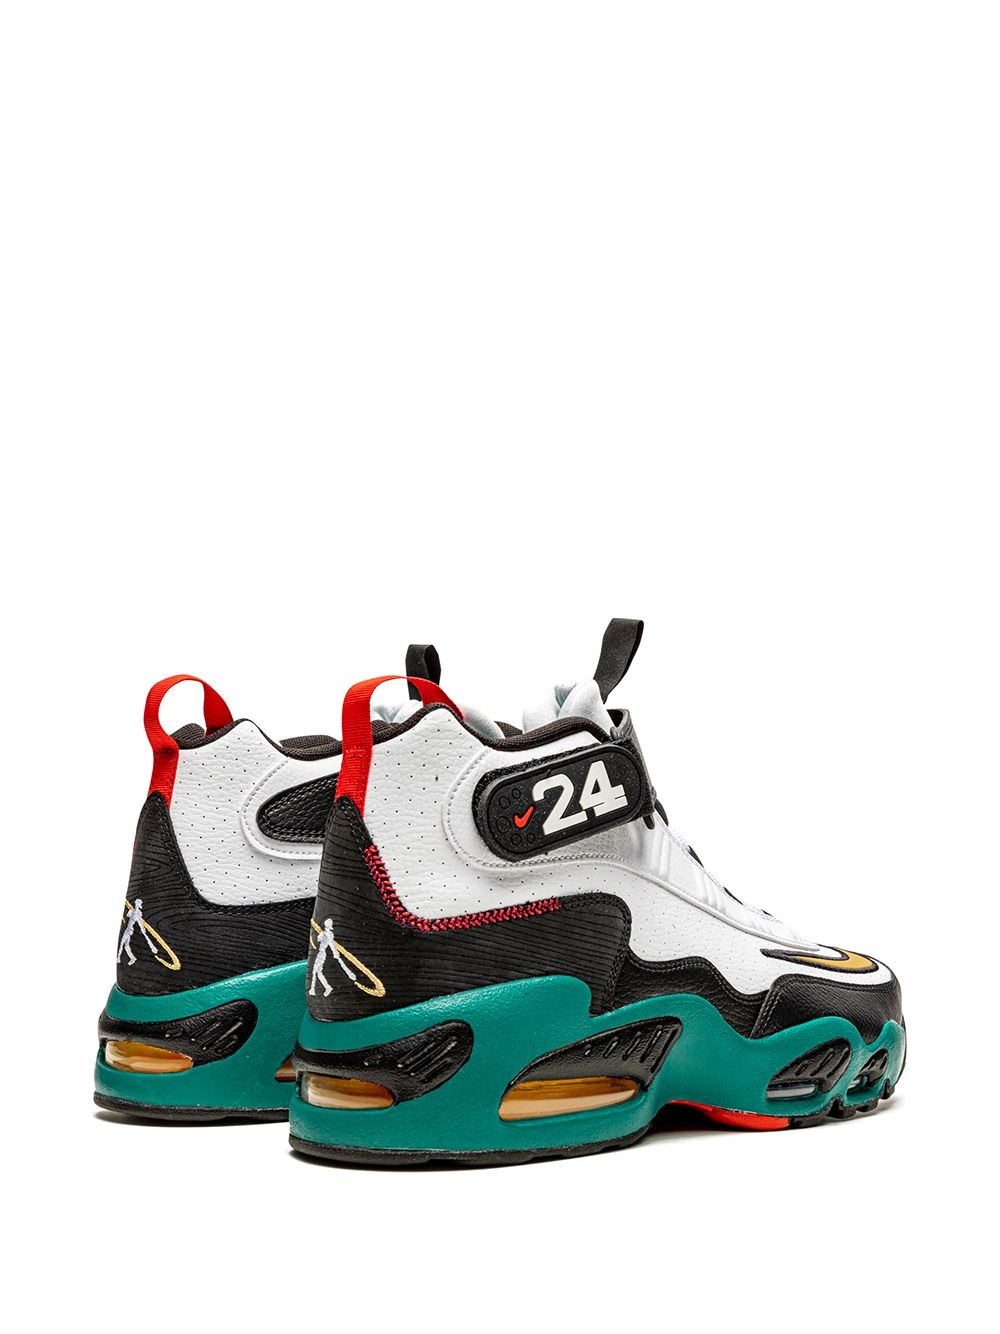 Air Griffey Max 1 "Sweetest Swing" sneakers - 3